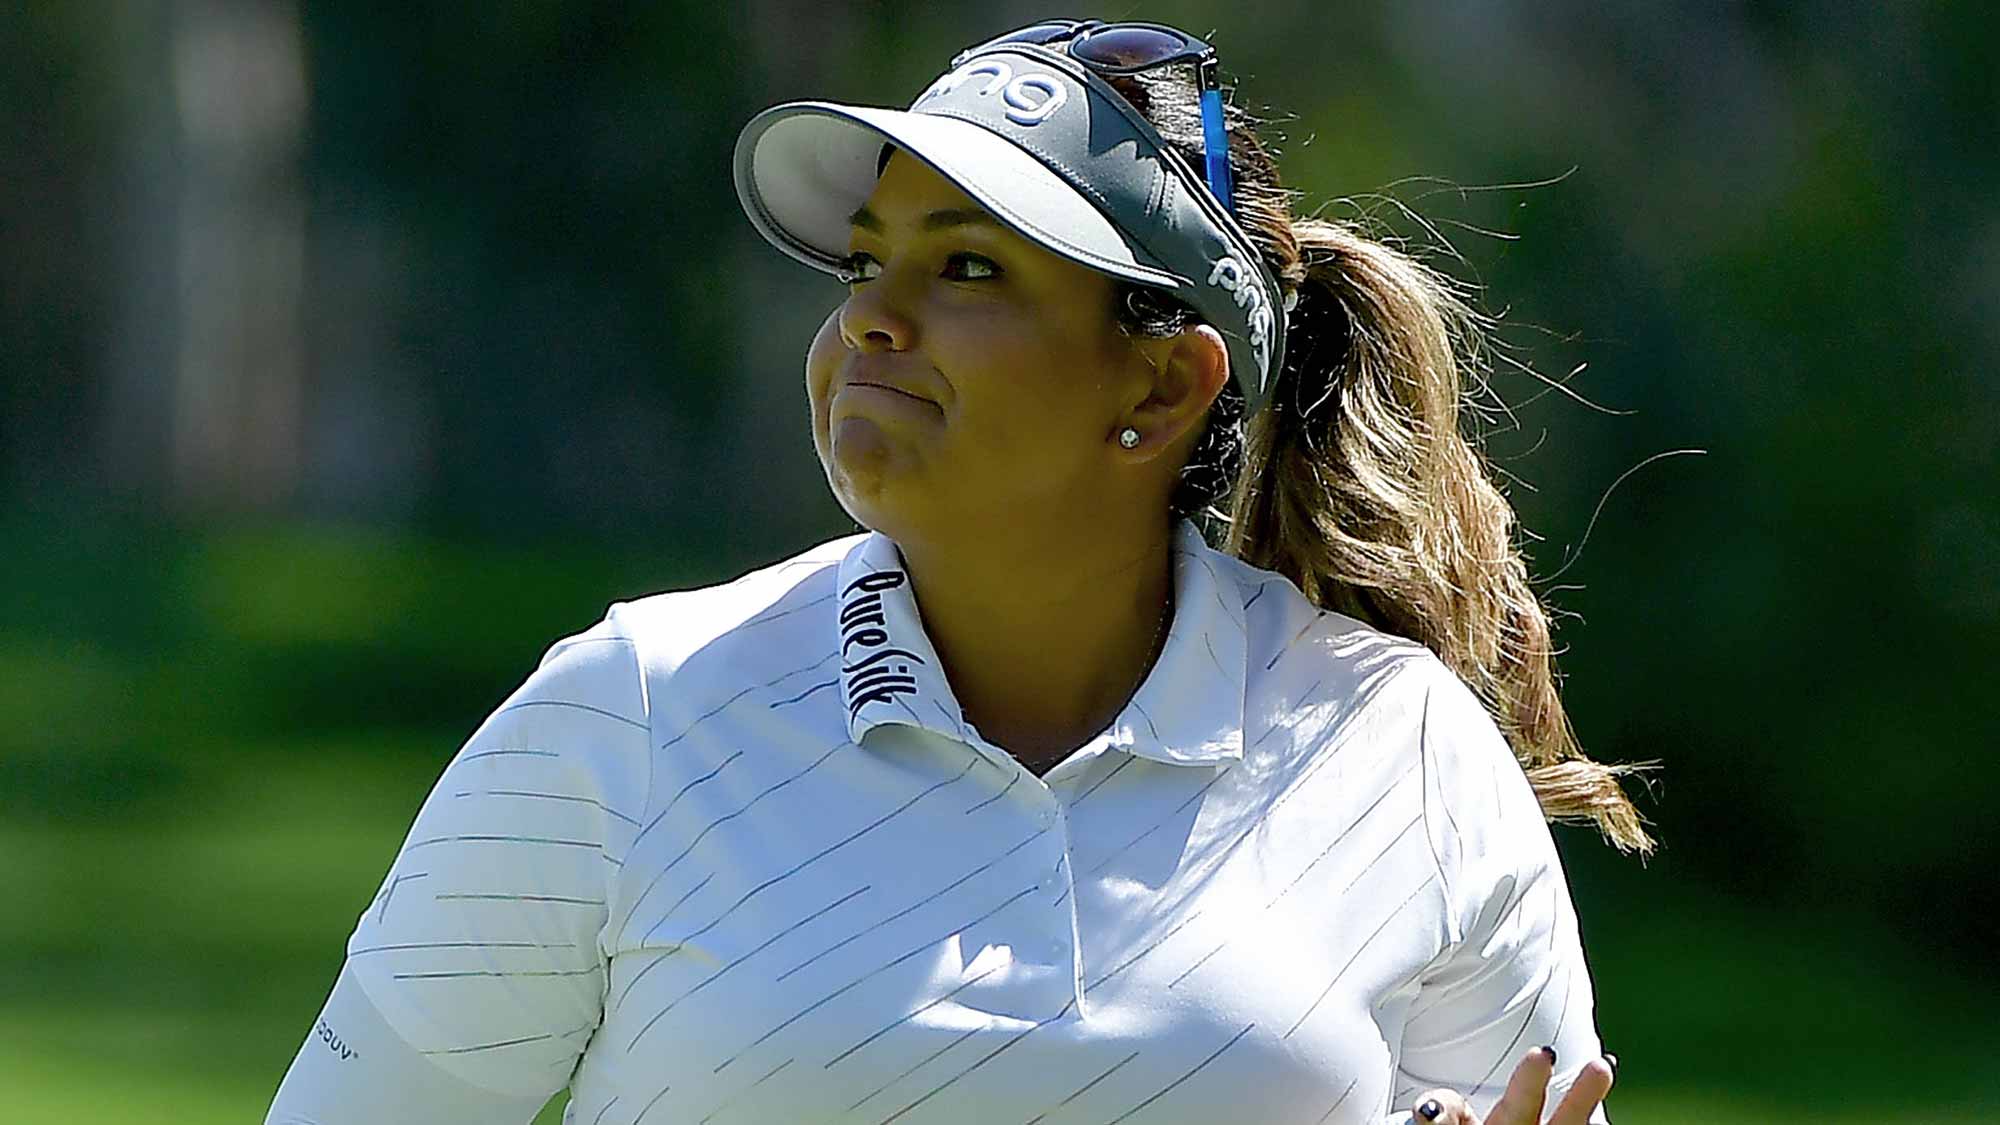 Lizette Salas reacts to her birdie putt on the 4th hole during Round Three of the LPGA KIA CLASSIC at the Park Hyatt Aviara golf course on March 24, 2018 in Carlsbad, California